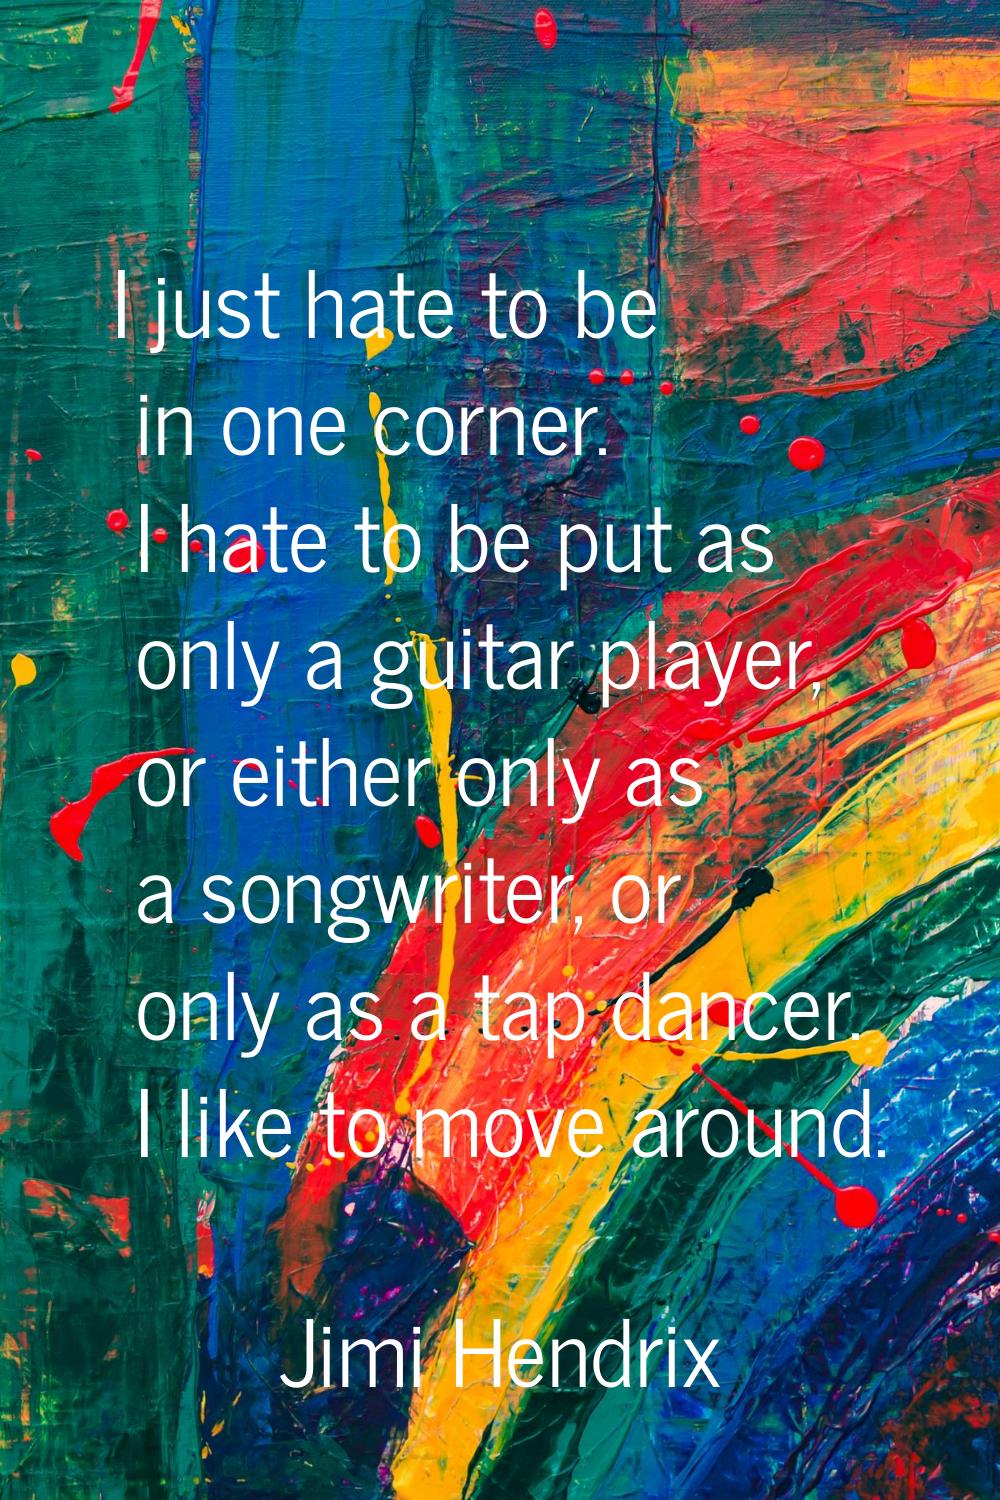 I just hate to be in one corner. I hate to be put as only a guitar player, or either only as a song